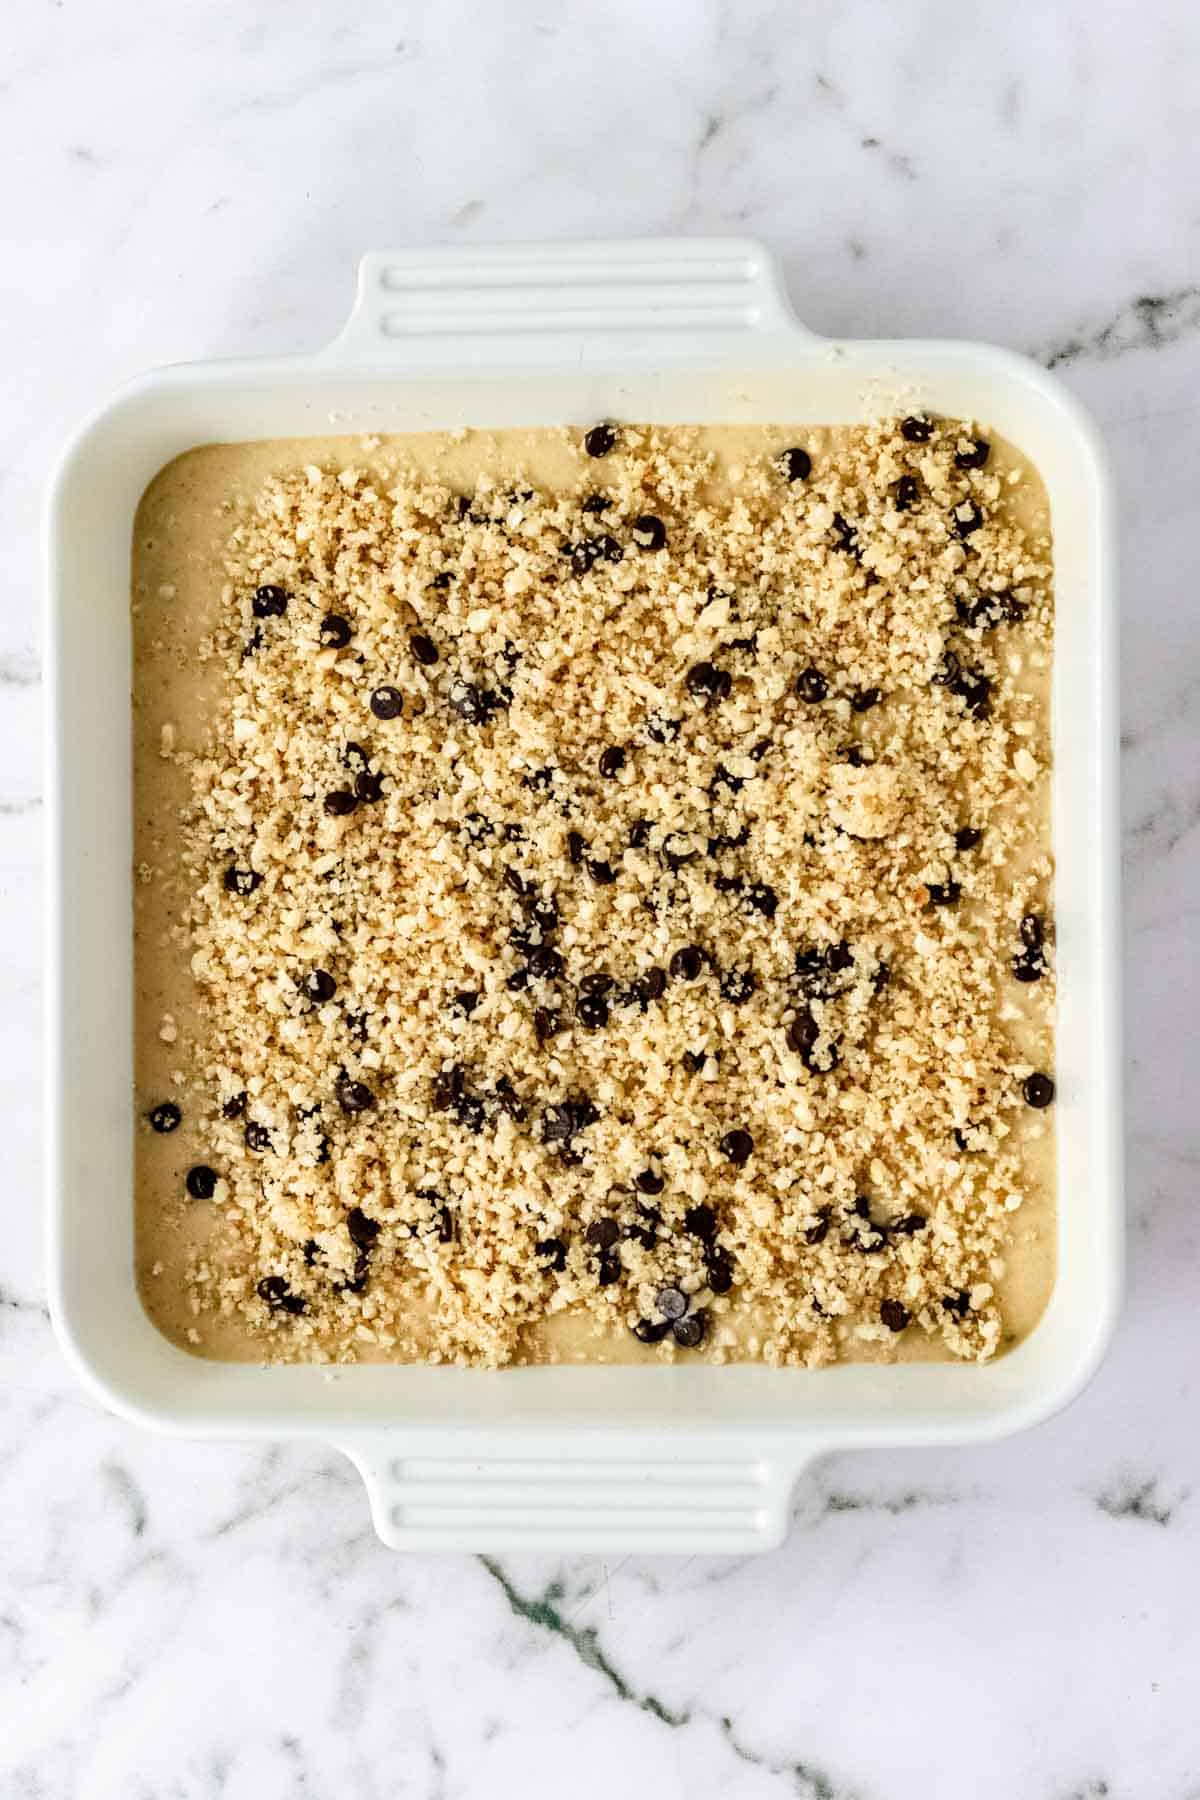 Hazelnut crumb topping sprinkled over top crumb cake batter in a ceramic baking dish.